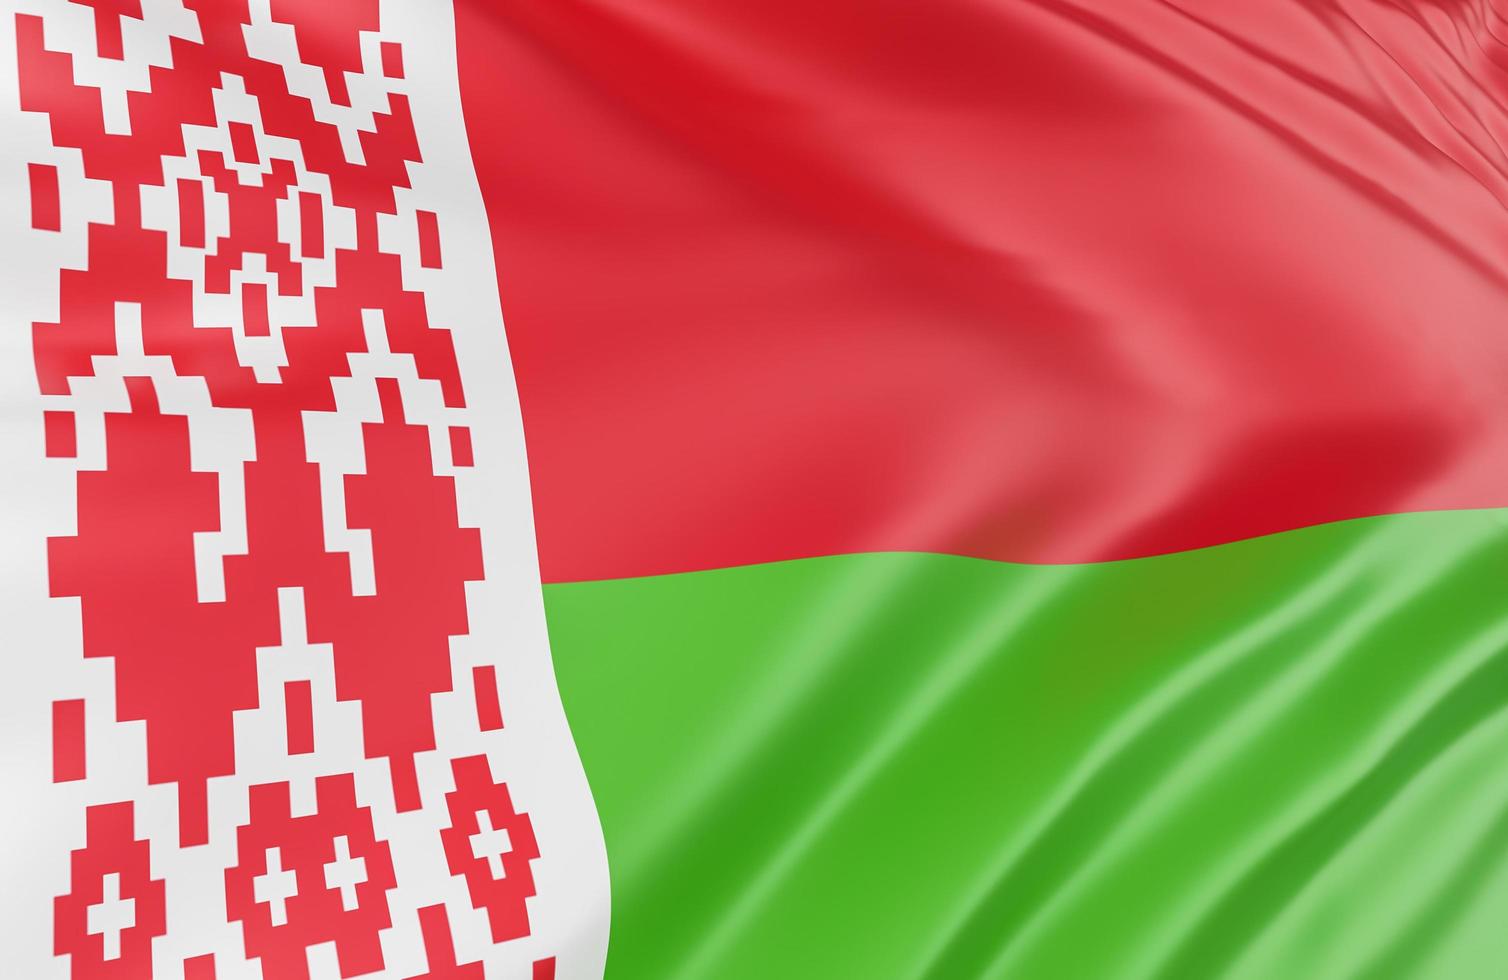 Beautiful Belarus Flag Wave Close Up on banner background with copy space.,3d model and illustration. photo